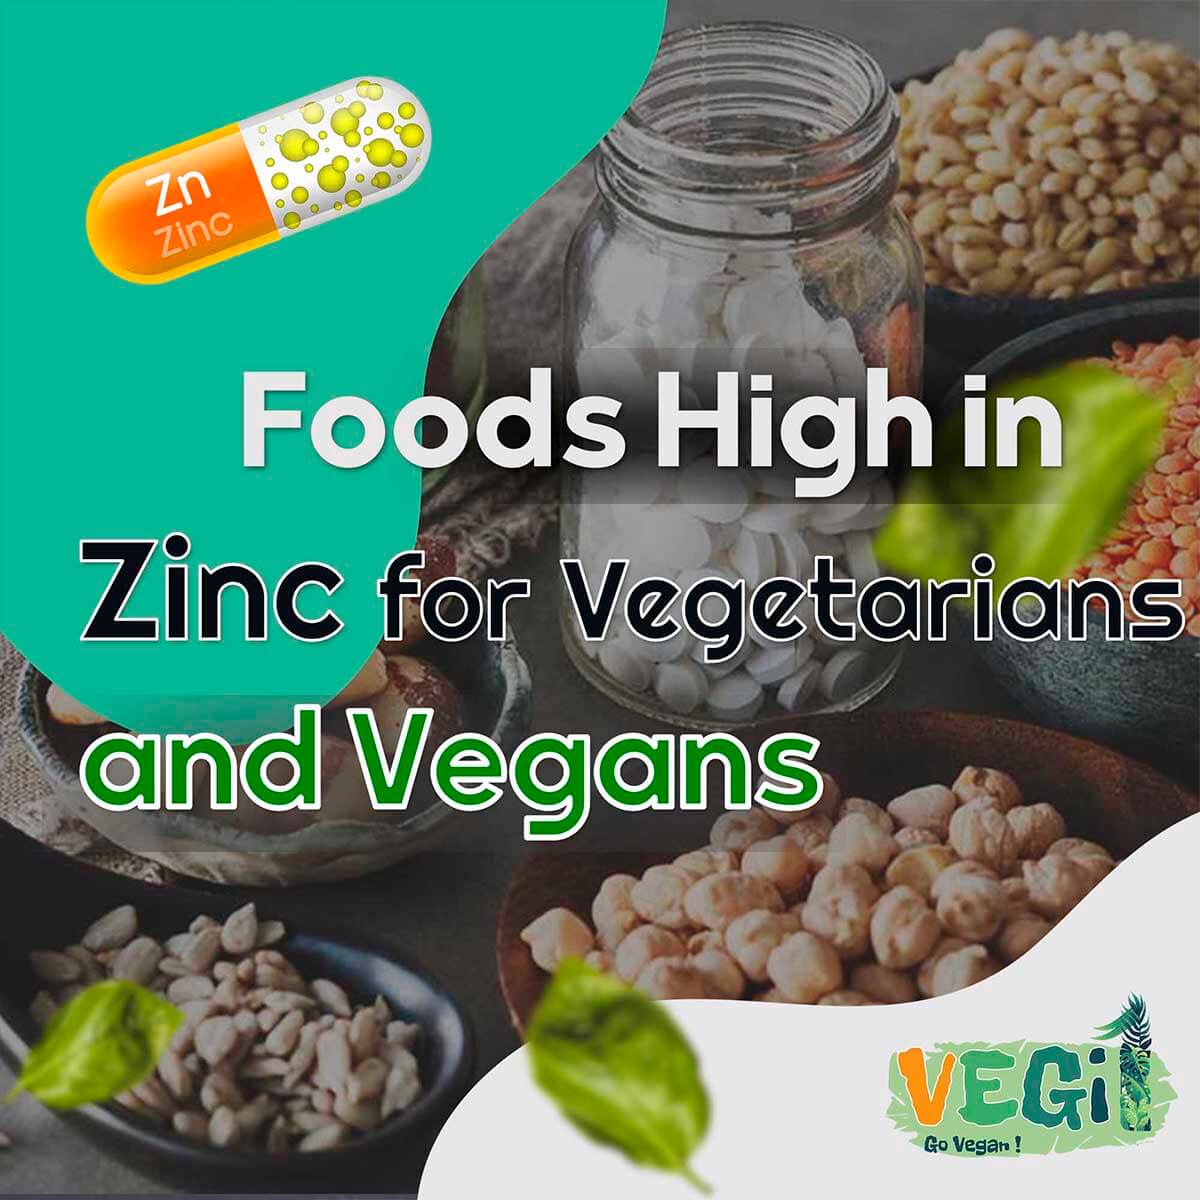 Foods High in Zinc for Vegetarians and Vegans